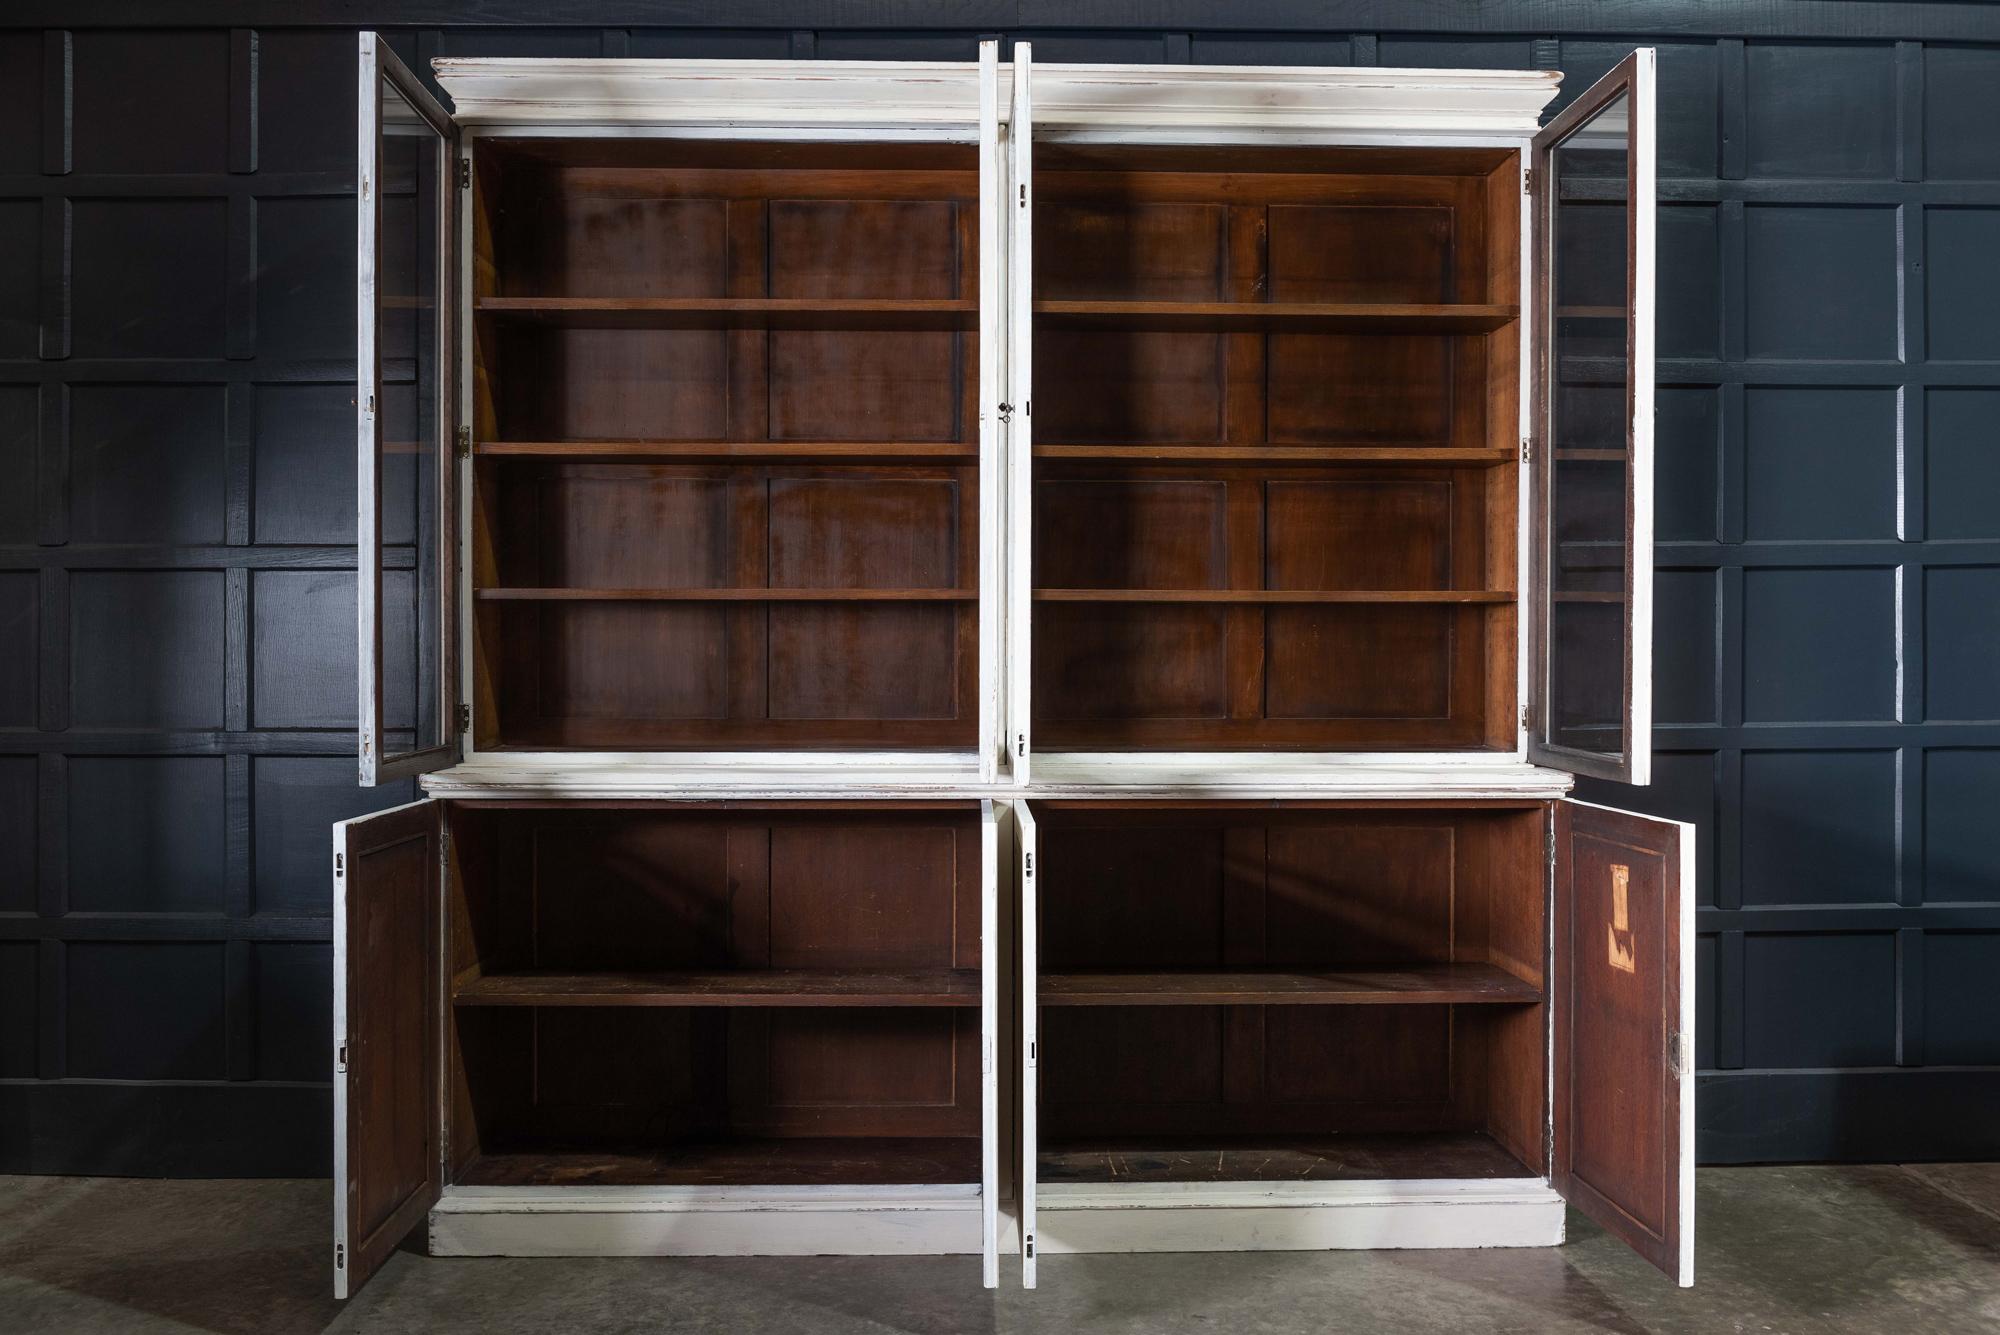 English 19th century large oak painted glazed bookcase,
circa 1870.

Adjustable shelves with solid brass adjusters, door locks with locking key and original brass catches. Three sections, cornice, glazed cabinet and base.

Great scale and